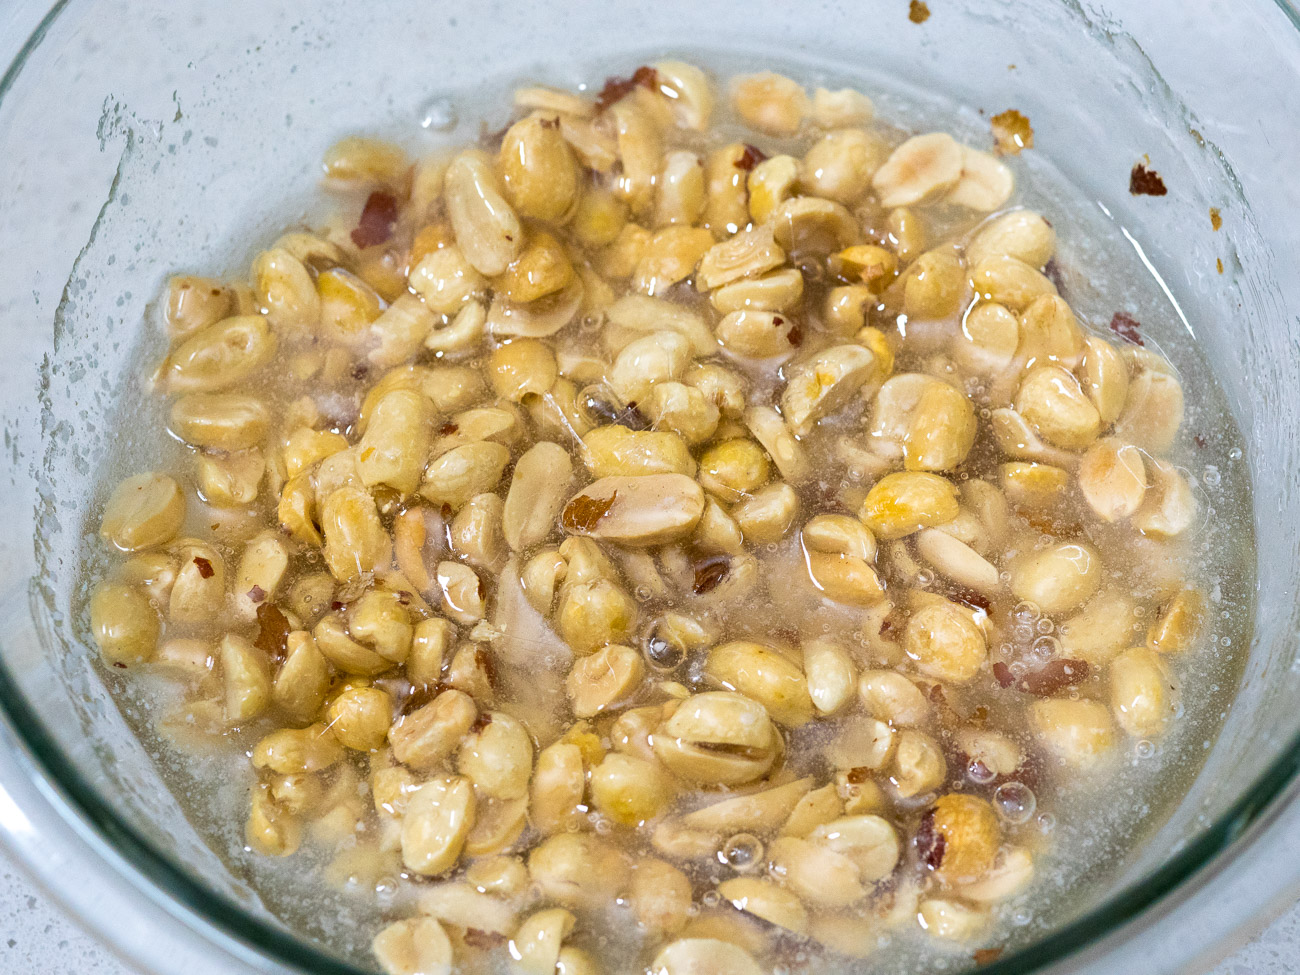 Stir in peanuts and salt, then microwave again on high power for 3 minutes, stirring hallway through cooking time.